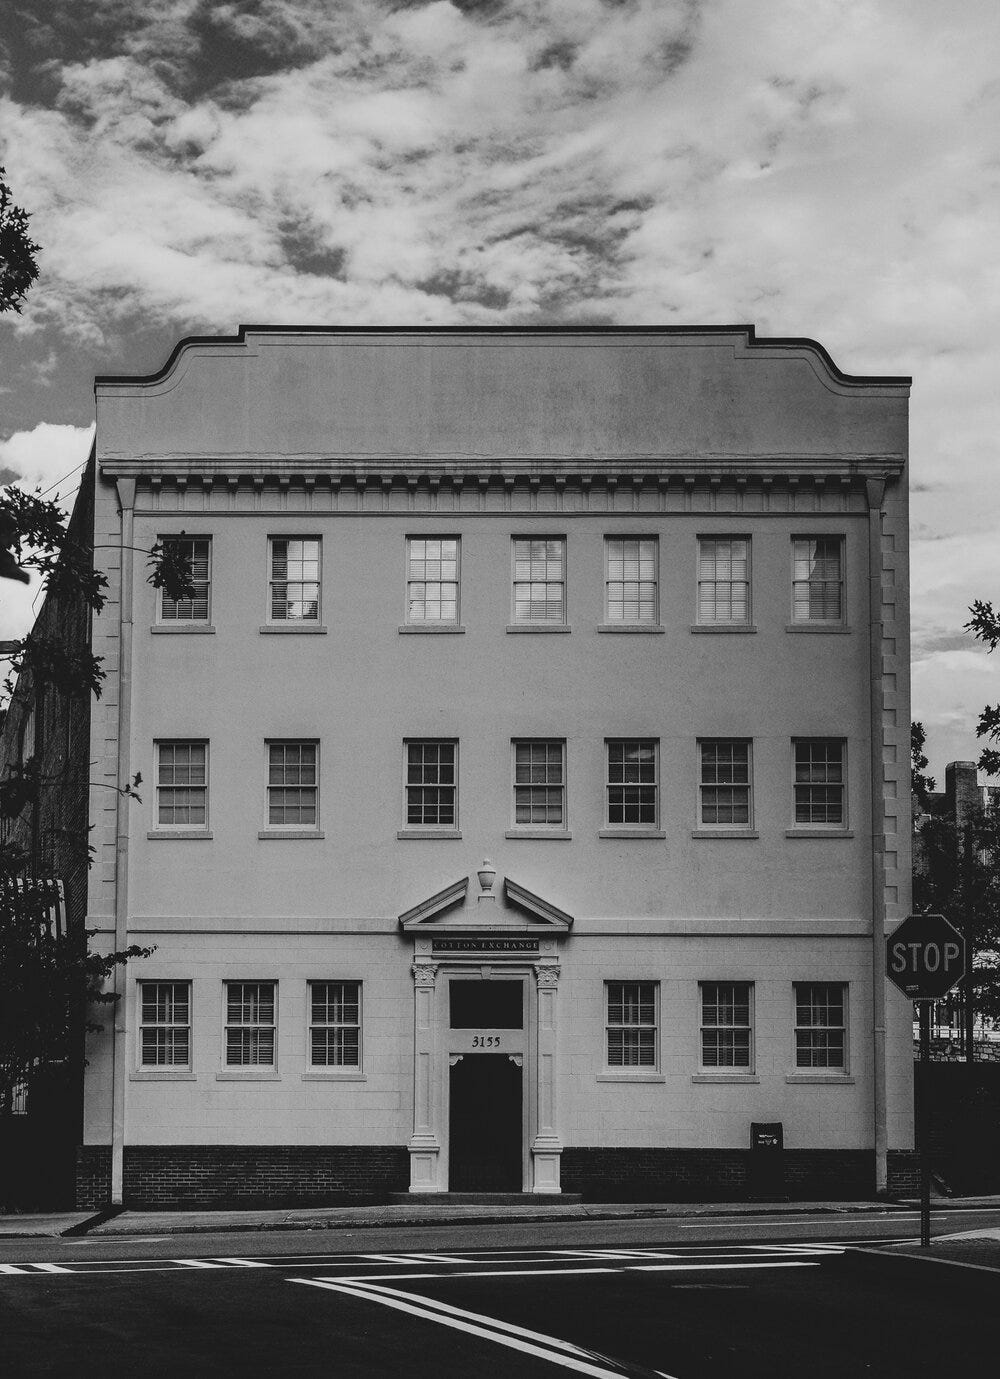 The Cotton Exchange at 3155 Roswell Road in Buckhead, where Klan robes and hoods were produced.